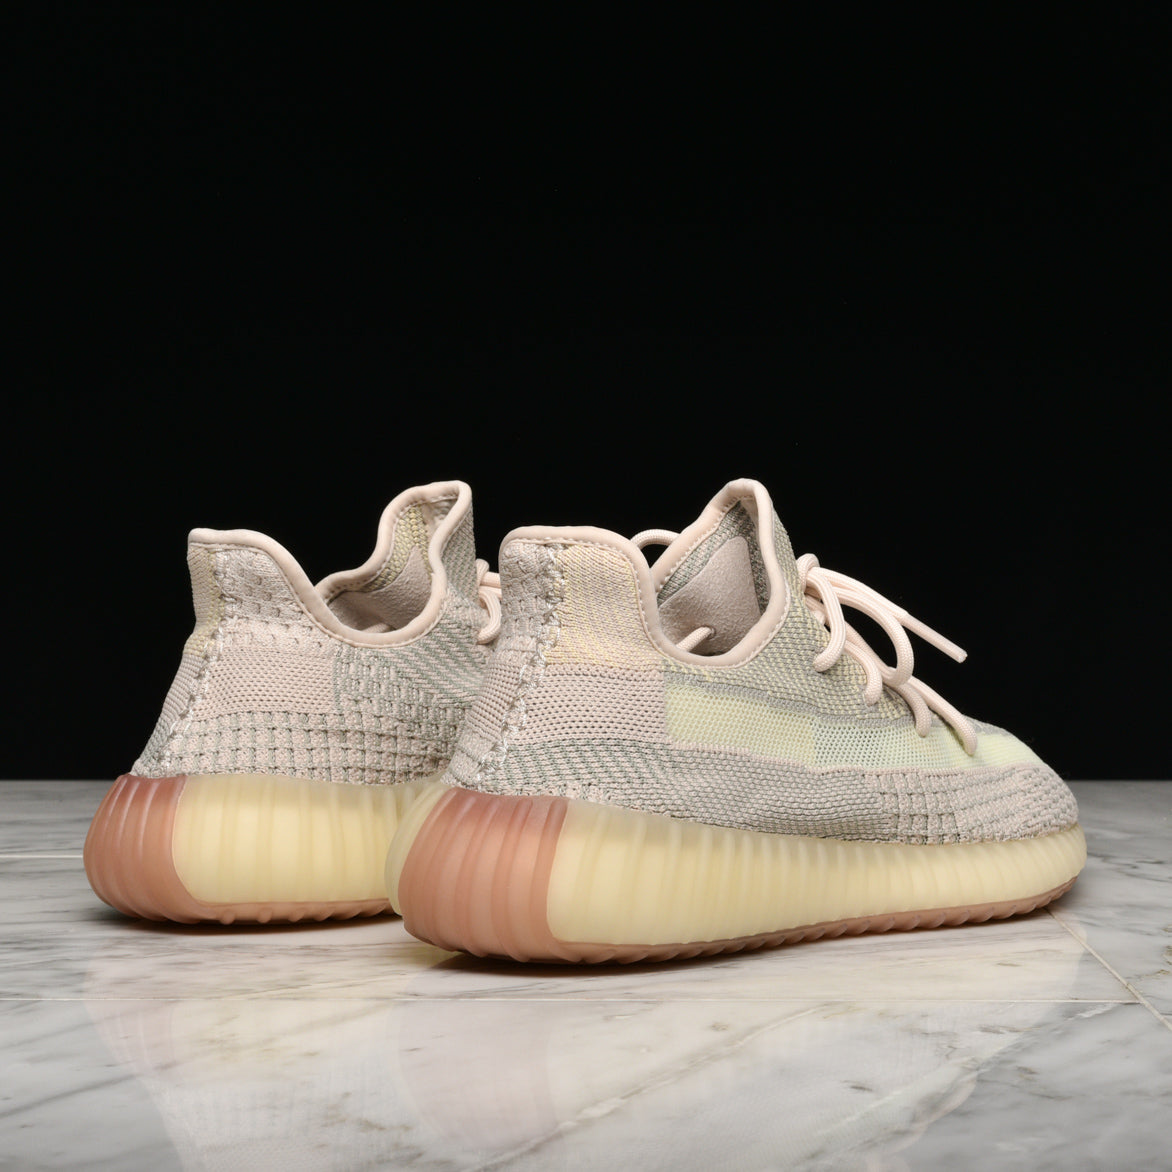 Adidas Yeezy Boost 350 V2 Citrin Reflective Size 6 Grailed